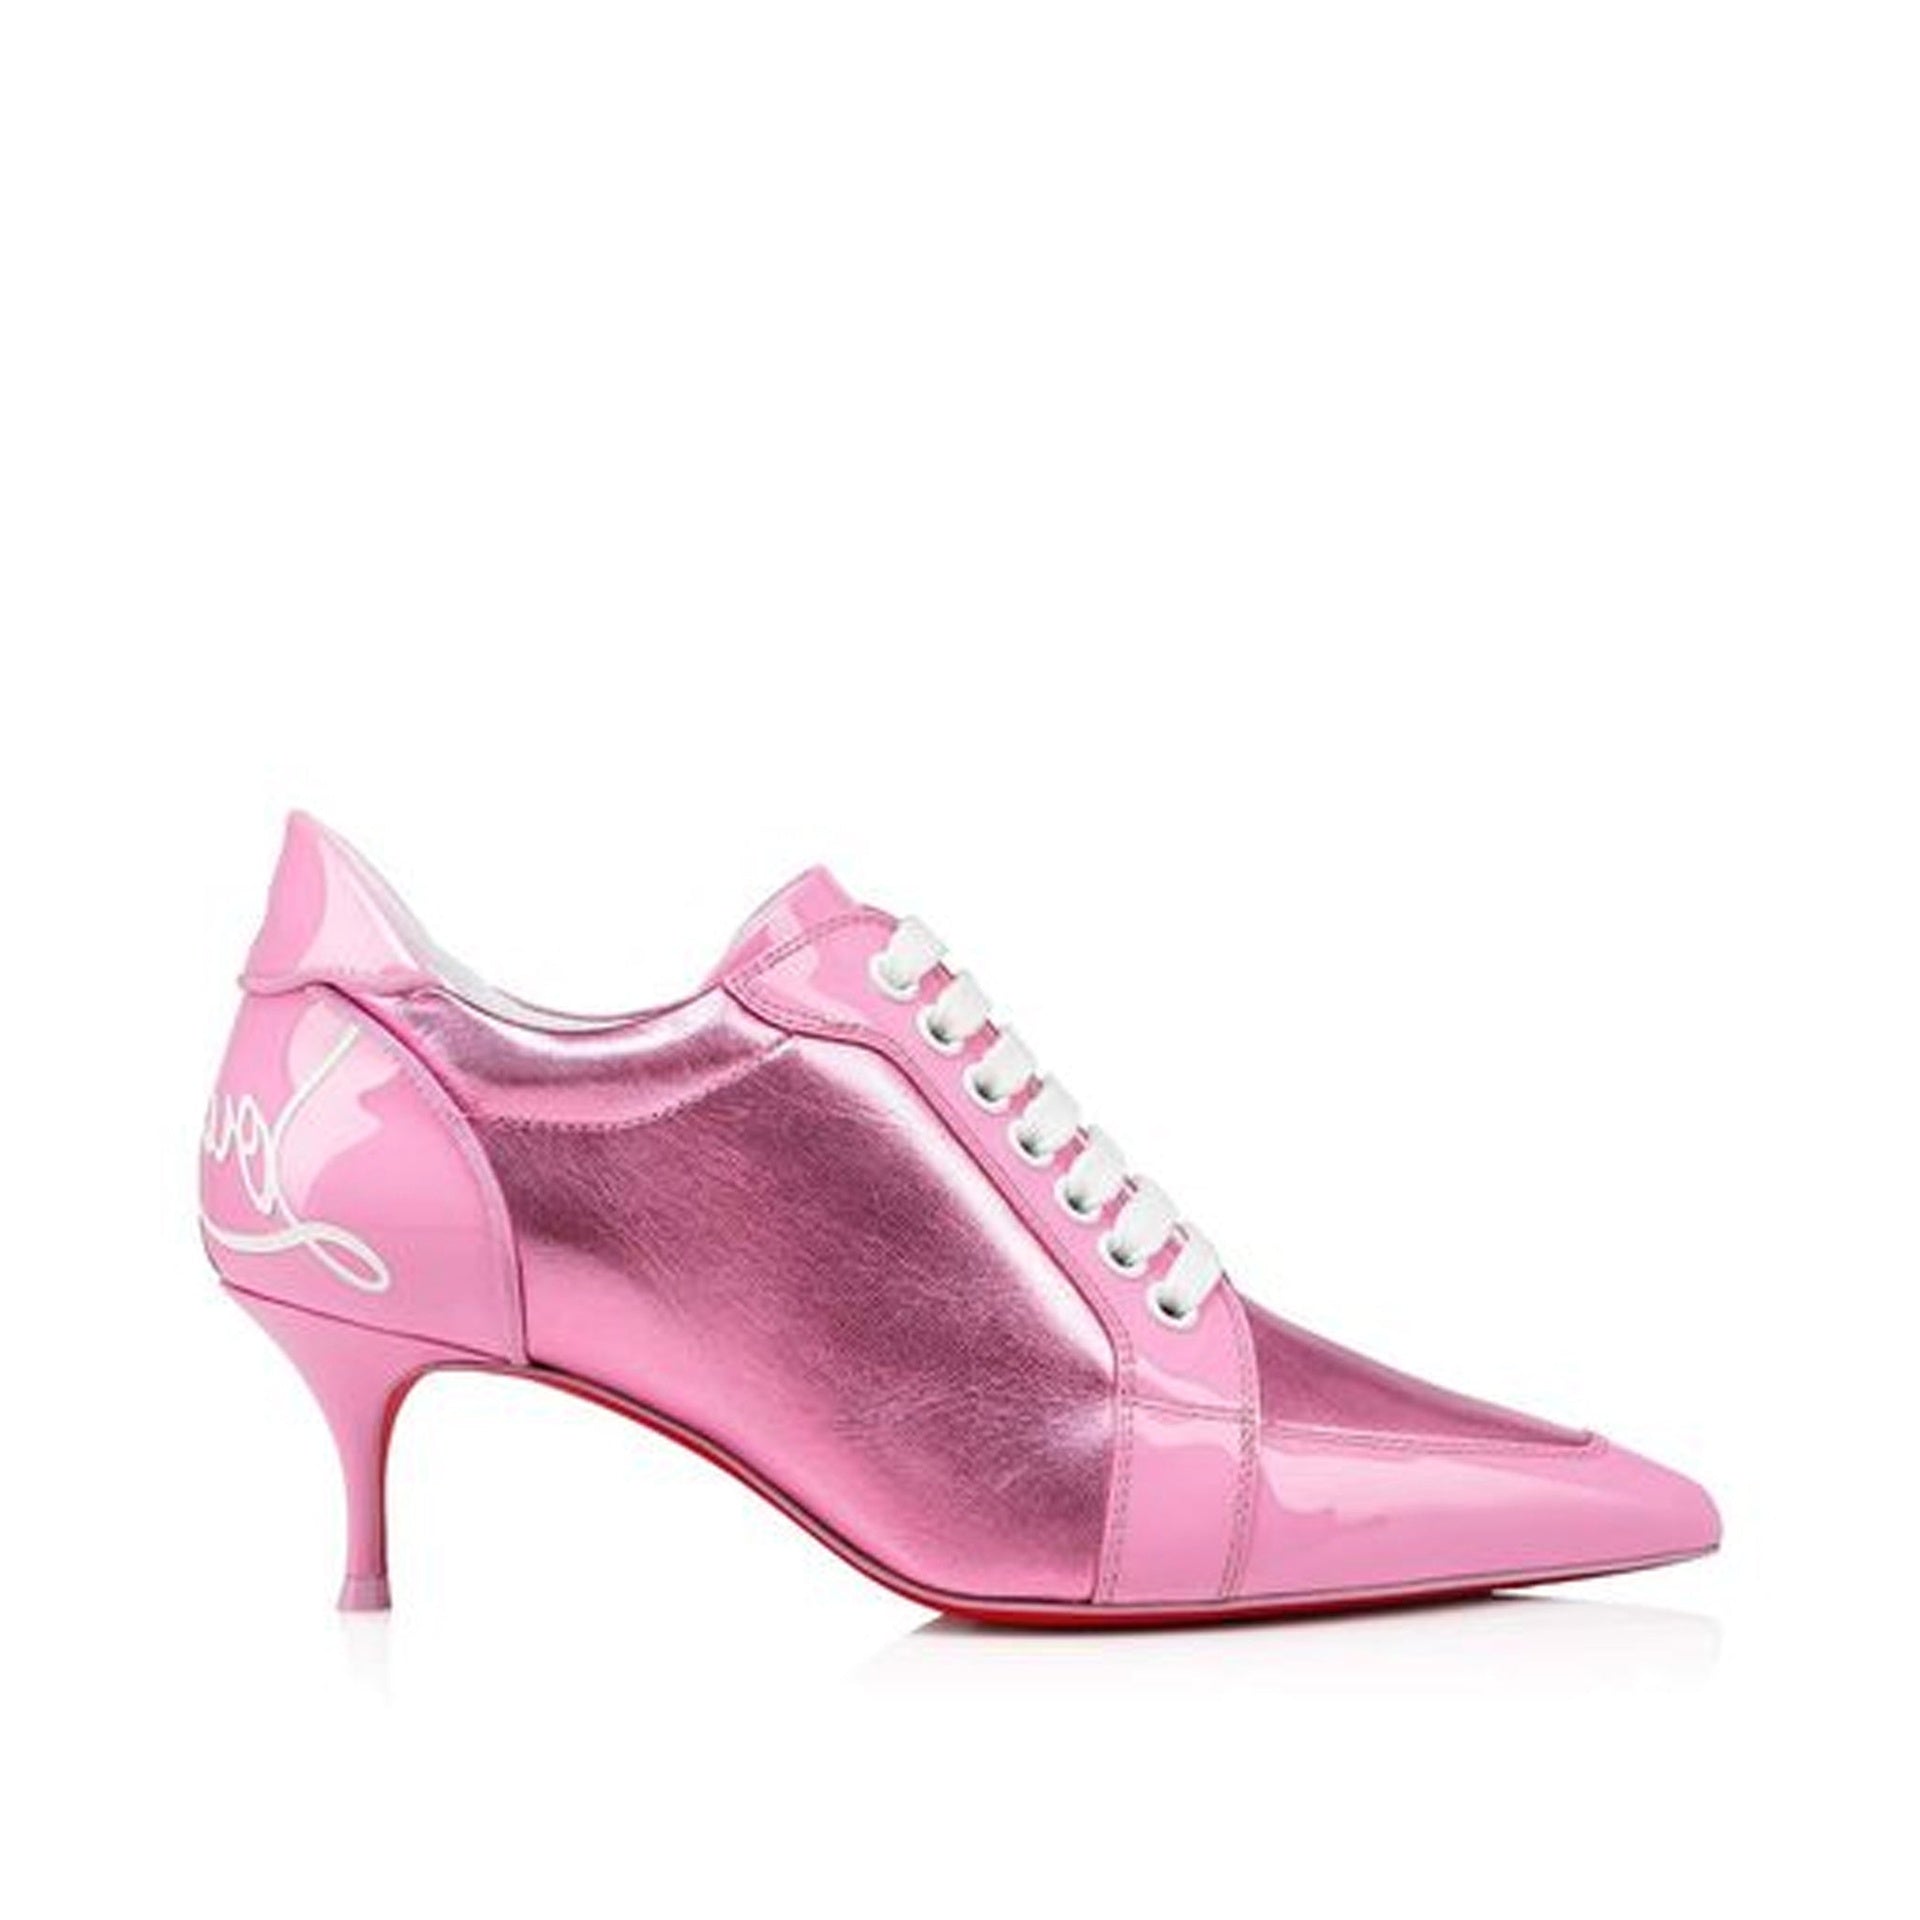 CHRISTIAN-LOUBOUTIN-OUTLET-SALE-Christian-Louboutin-Leather-Pumps-Pumps-PINK-35_5-ARCHIVE-COLLECTION.jpg